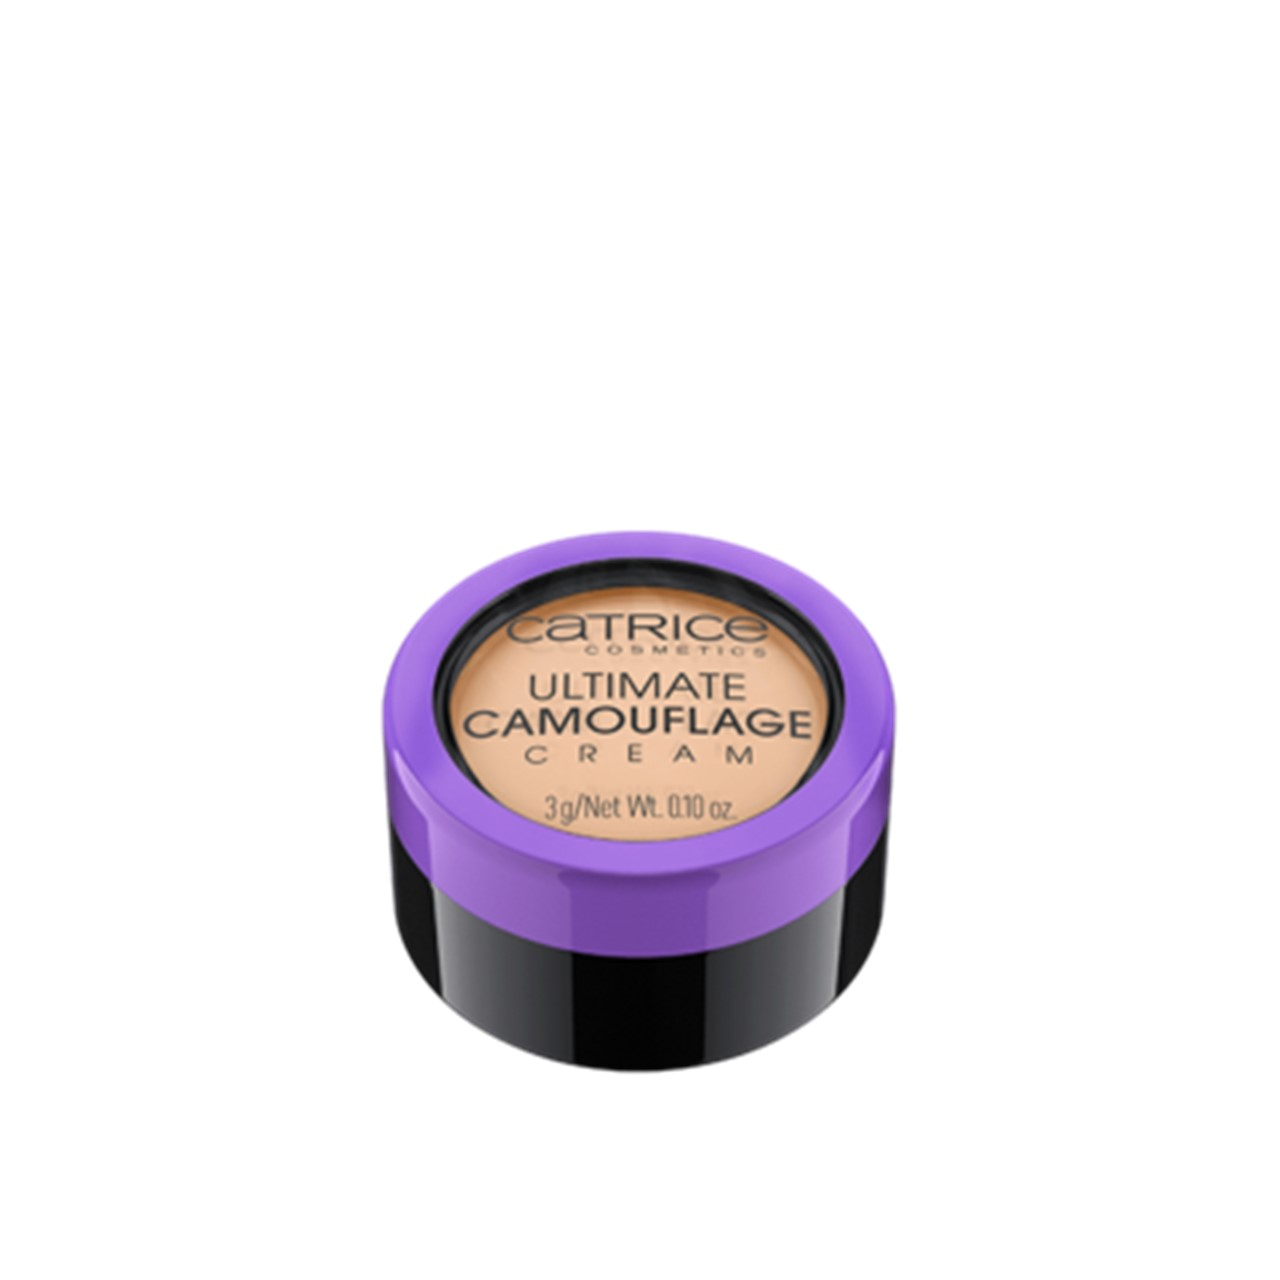 Buy Catrice Ultimate Camouflage Cream 3g Greenland · 015 W Fair